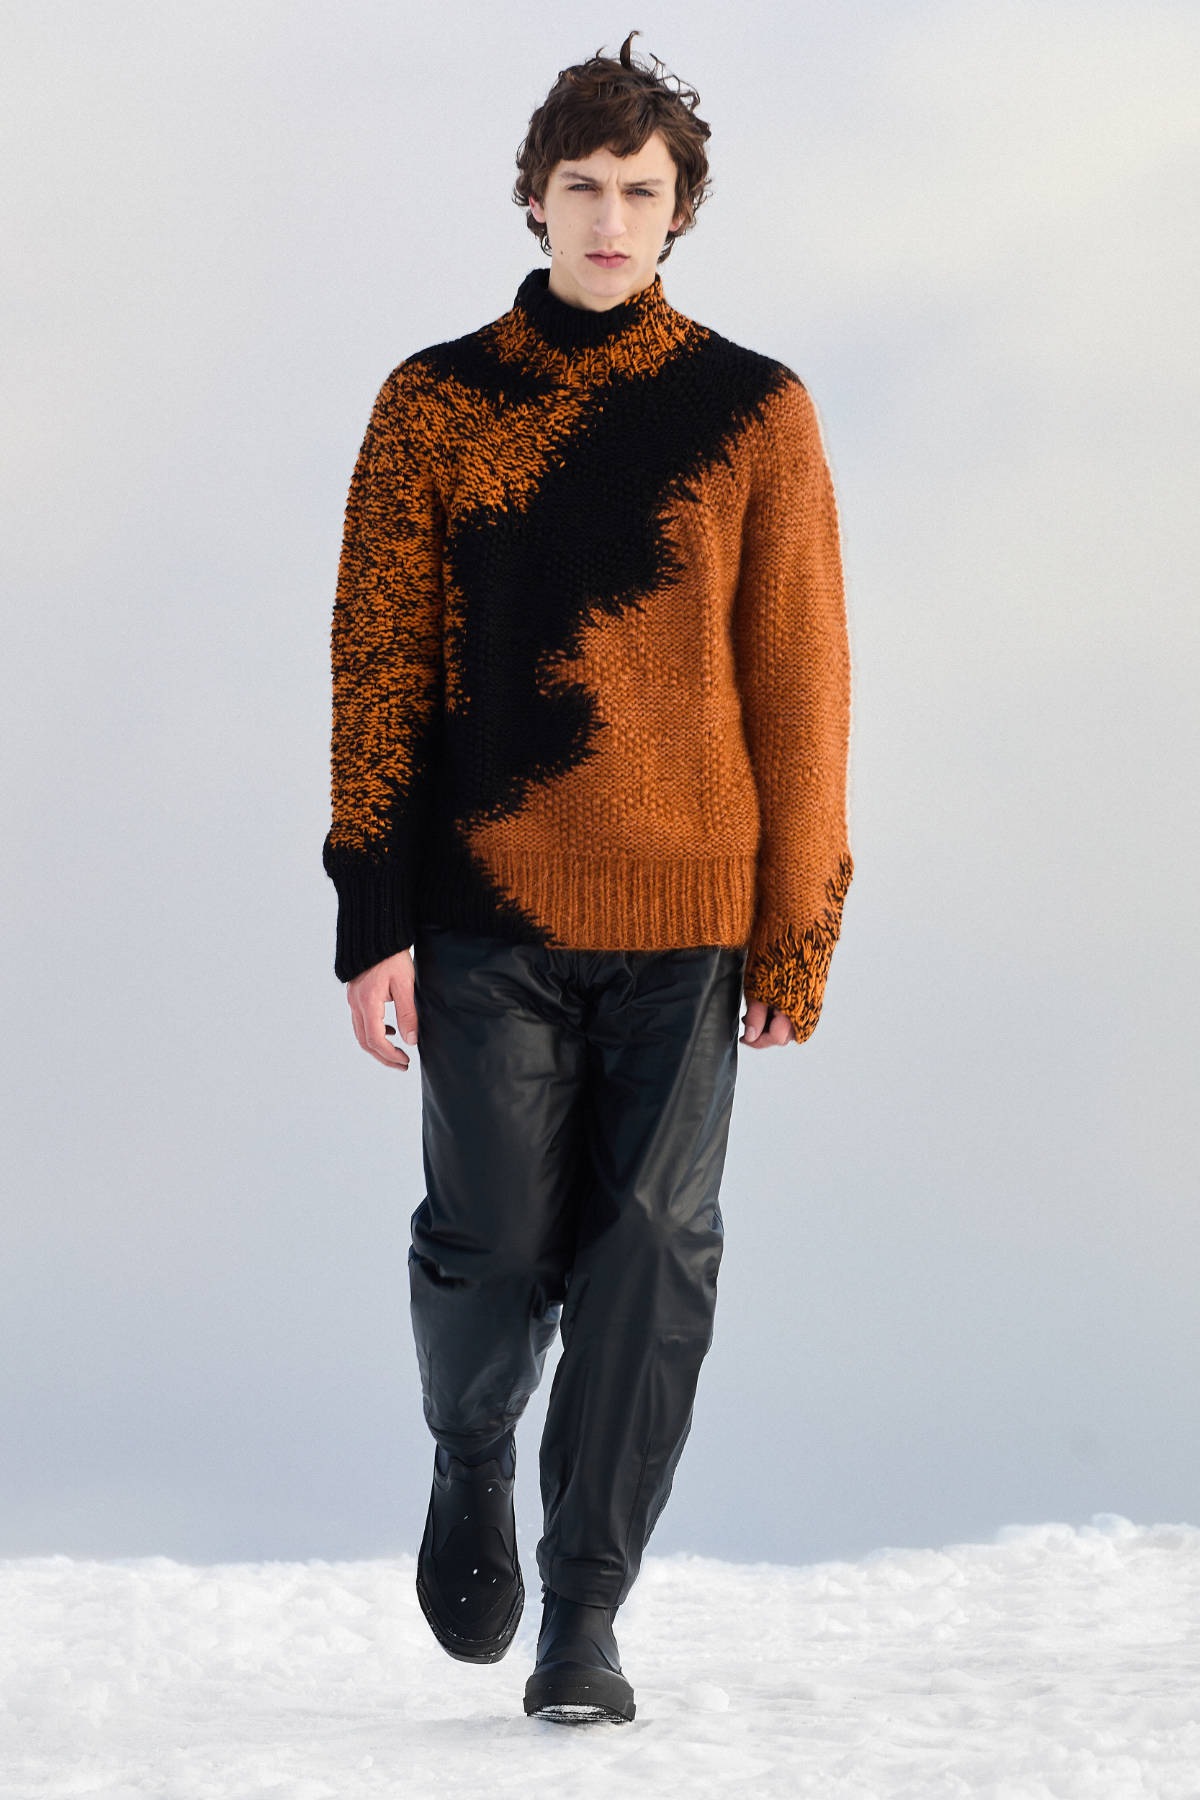 Zegna Presents Its Winter 2022 Collection: A Path Worth Taking